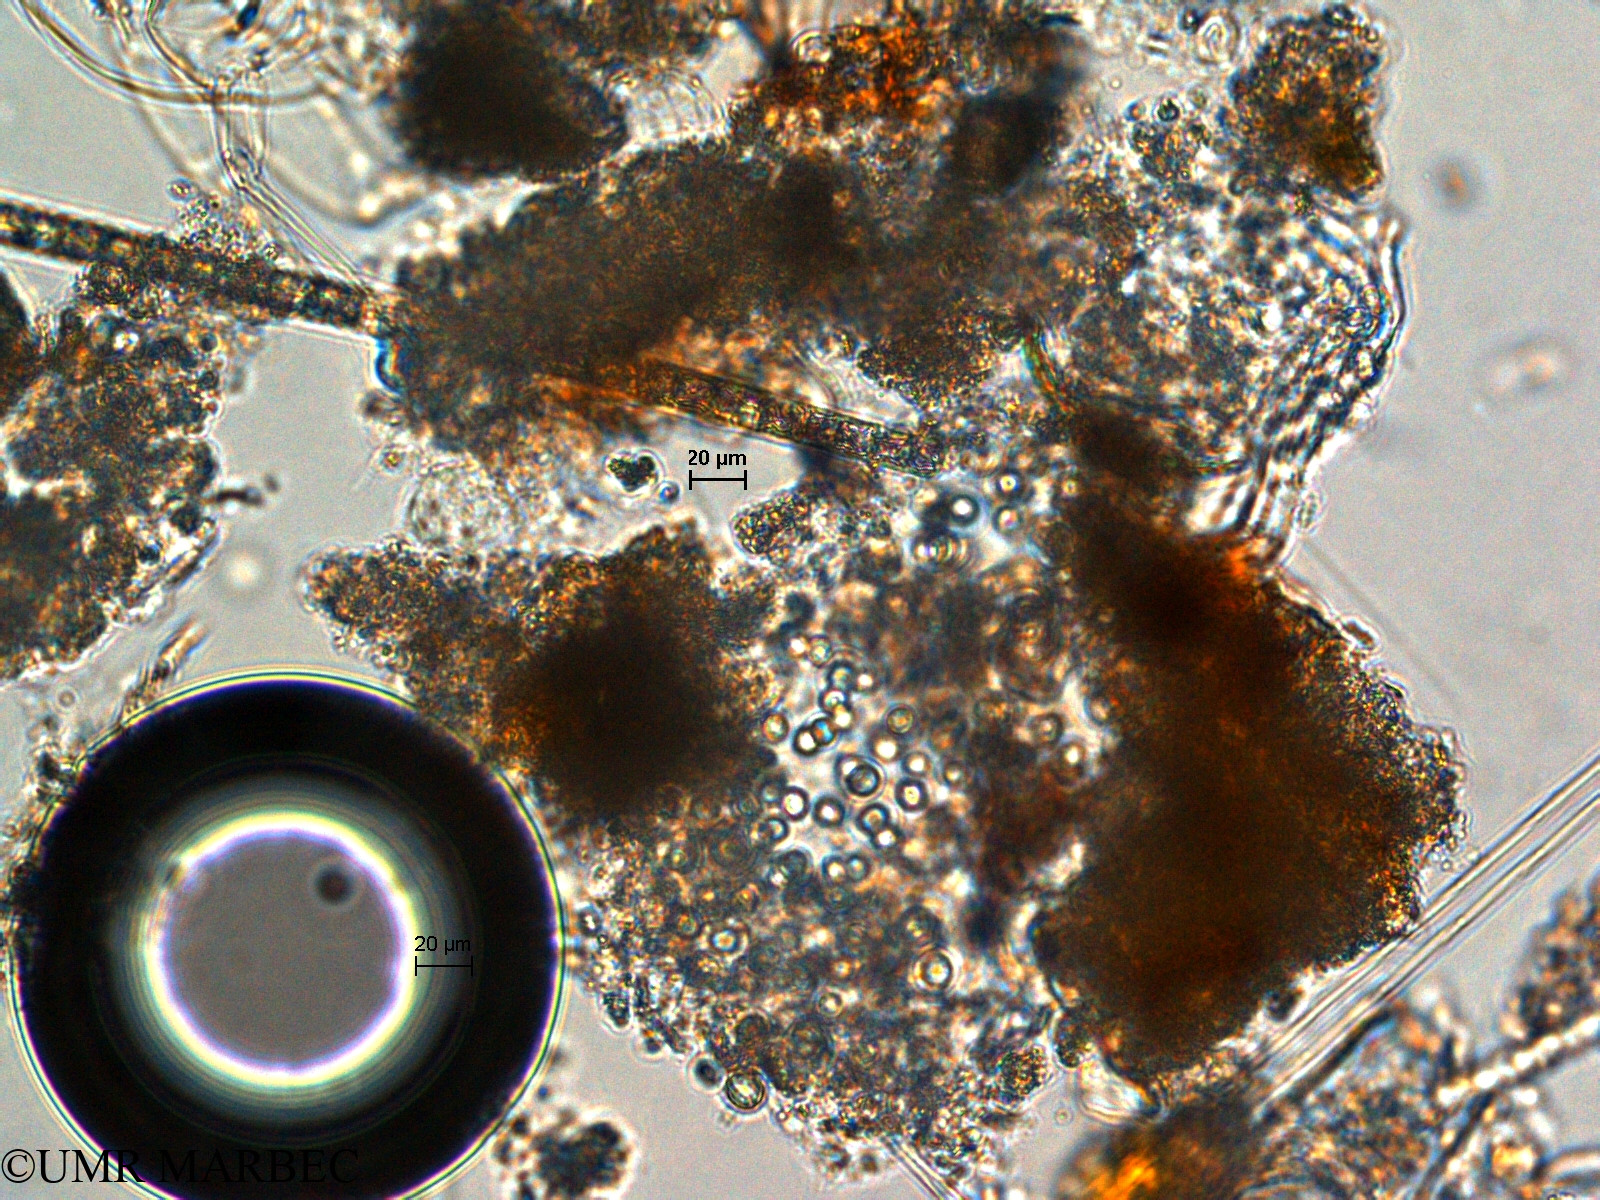 phyto/Scattered_Islands/europa/COMMA April 2011/Aphanocapsa sp5 (ancien Chroococcus sp2 -1)(copy).jpg